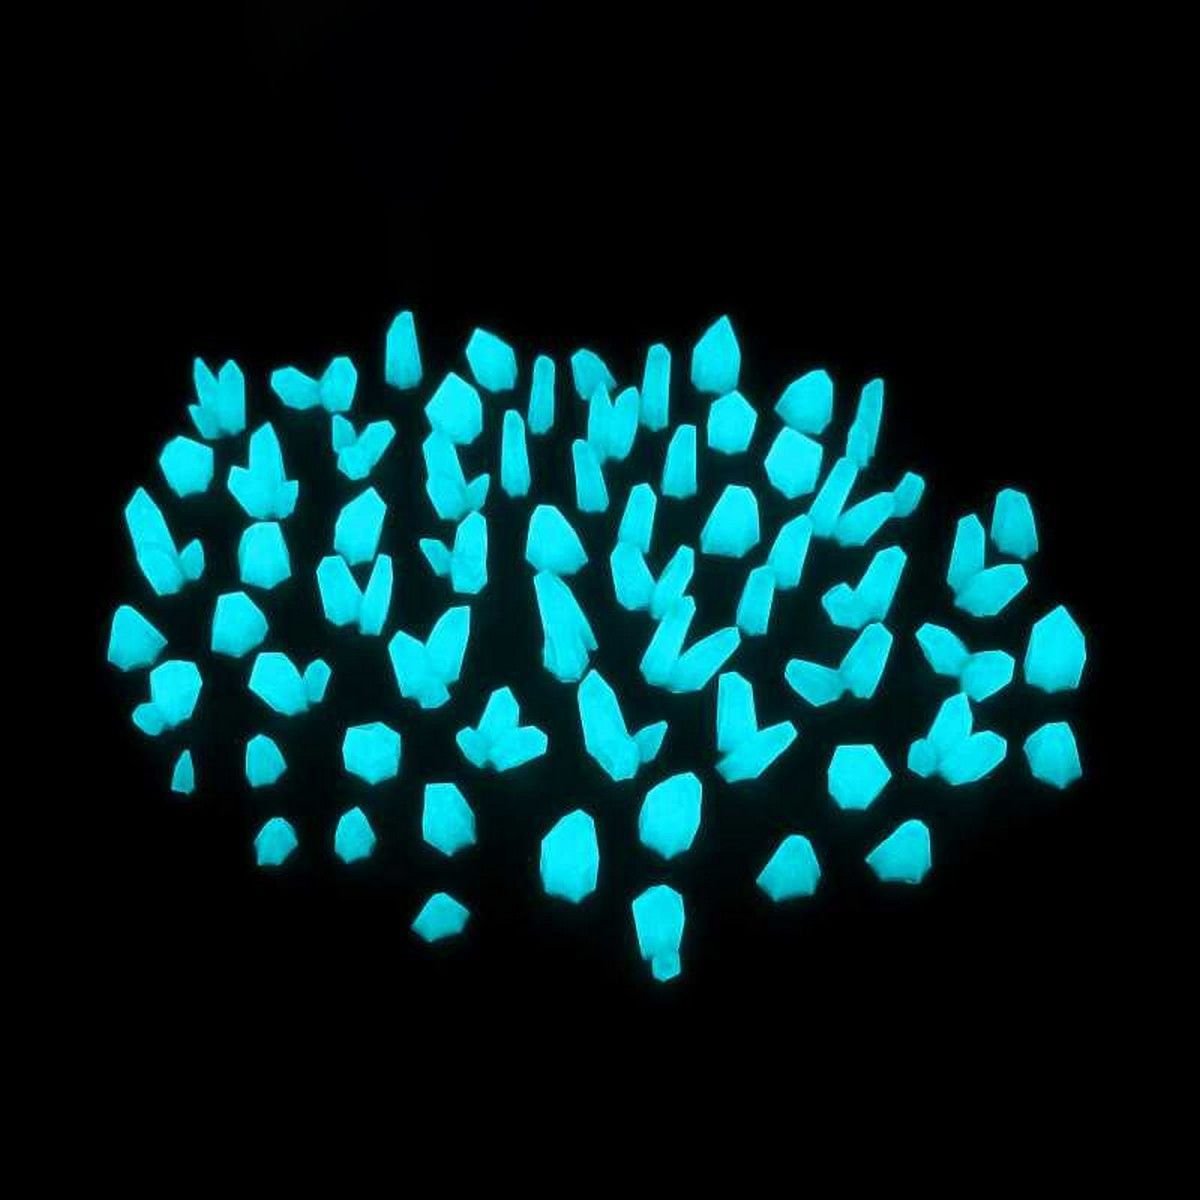 Aqua Turquoise Glow Resin Crystals - Small